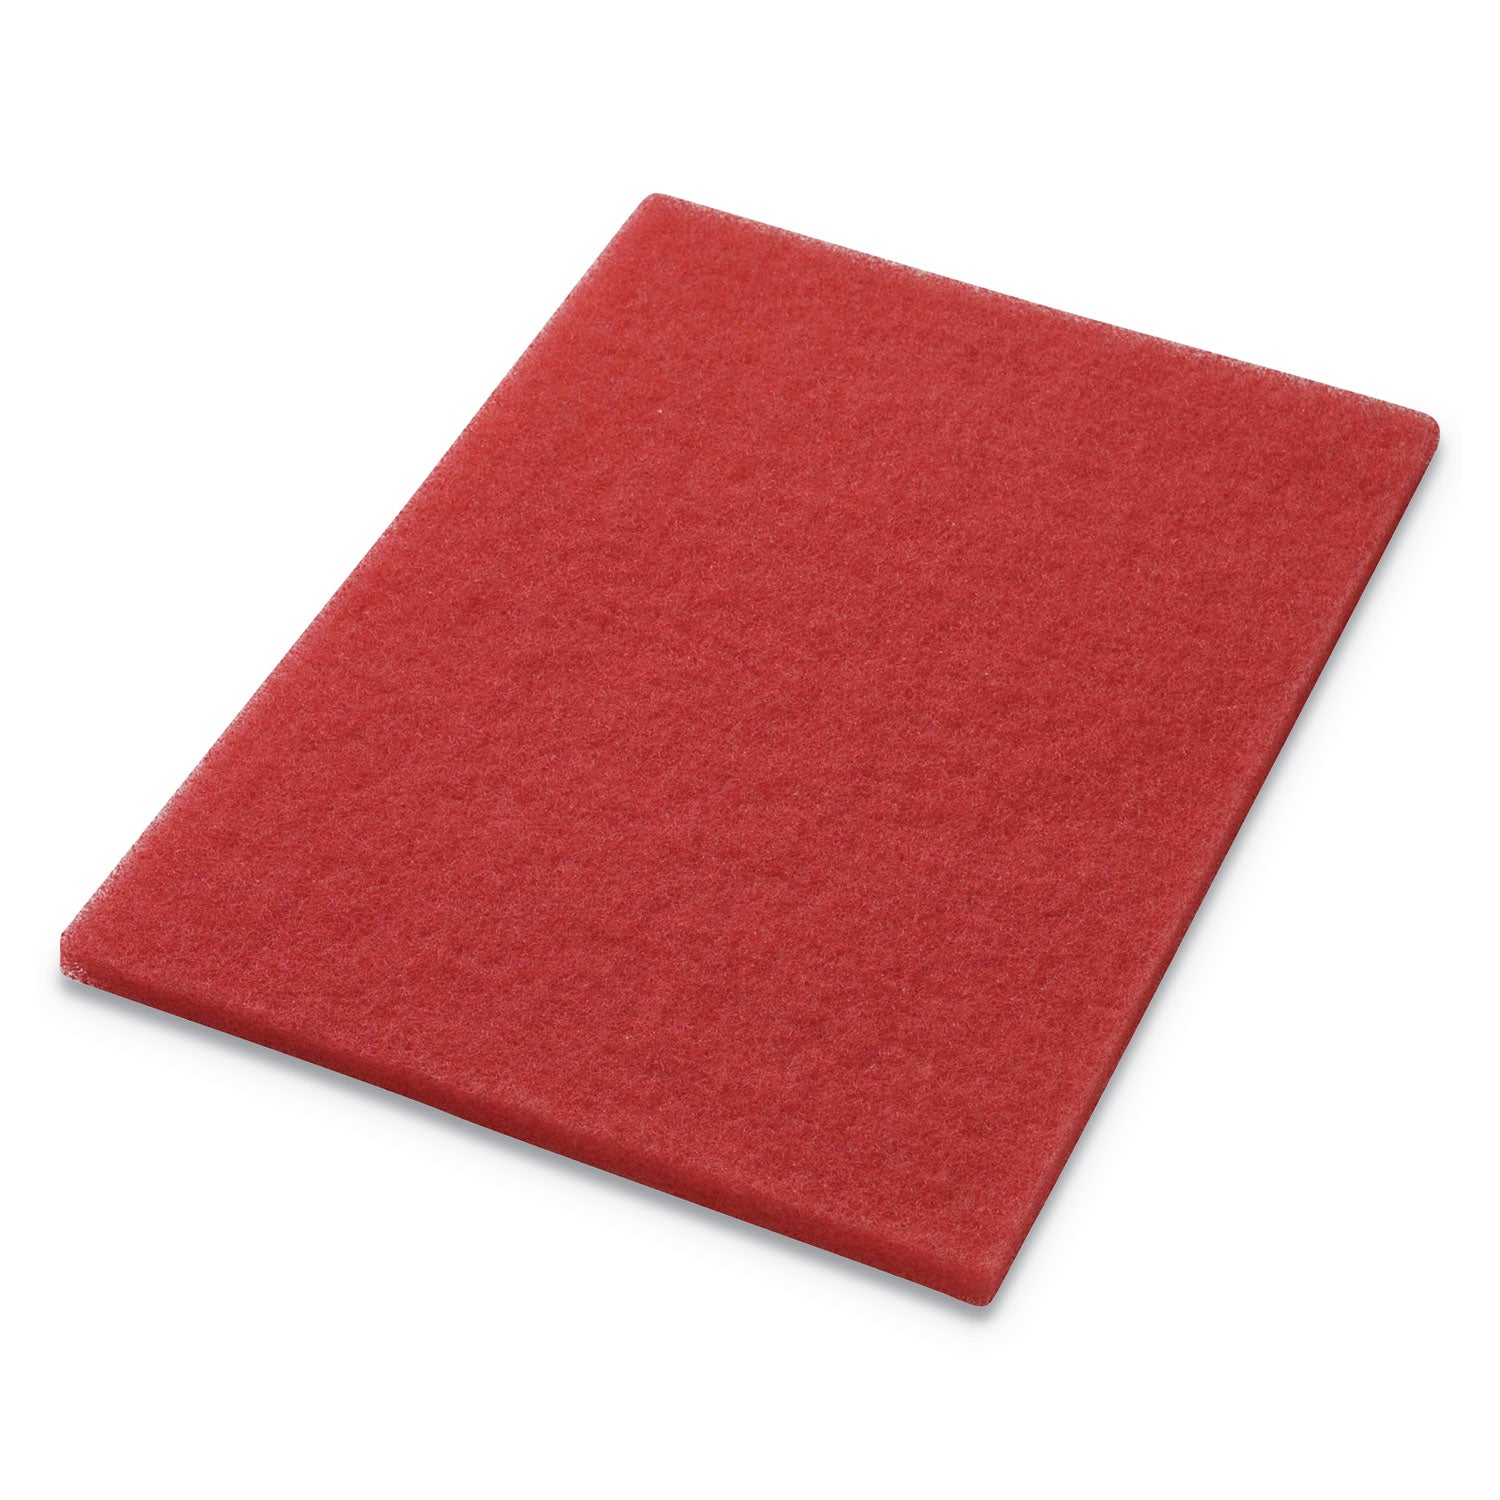 buffing-pads-14-x-20-red-5-carton_amf40441420 - 1